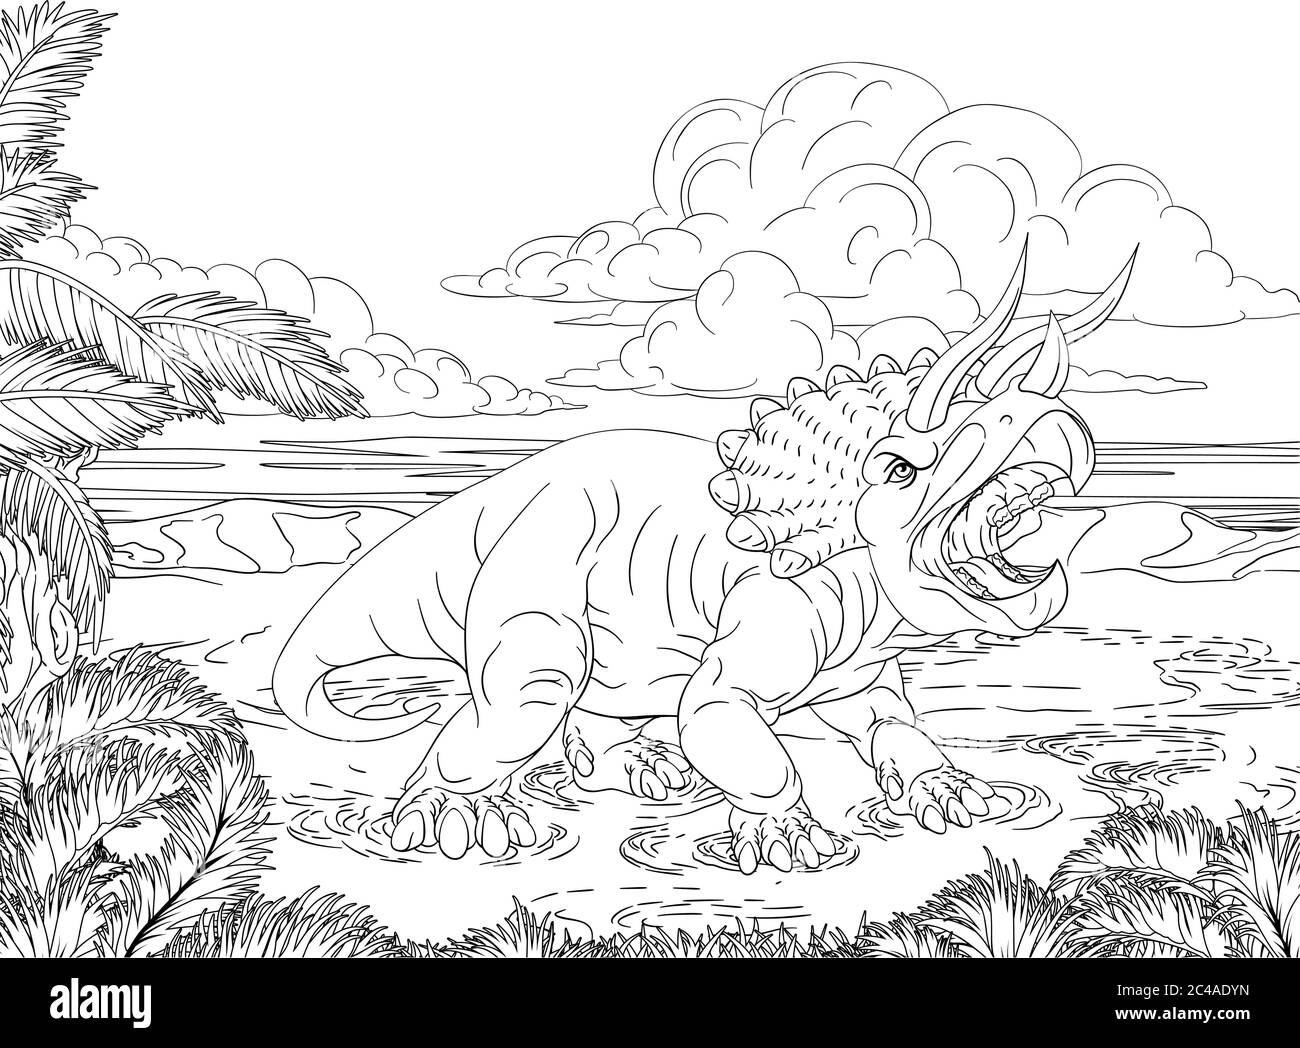 Dinosaur Triceratops Scene Coloring Book Page Stock Vector